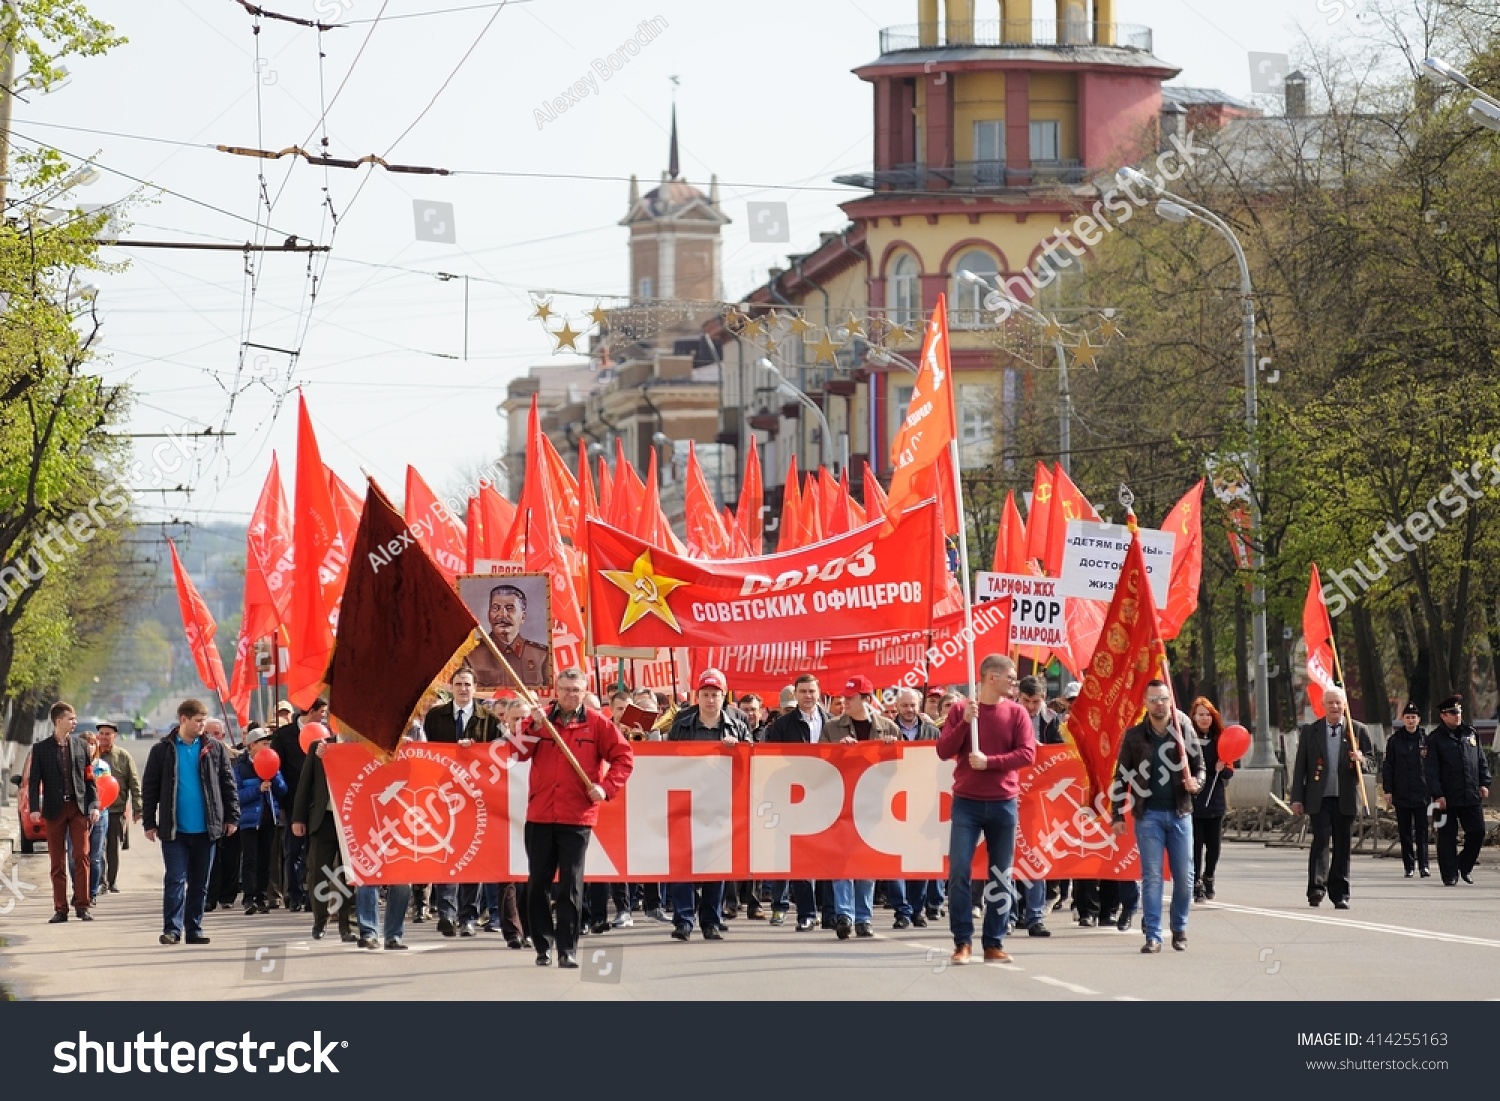 Orel, Russia - May 1, 2016: Communist party demonstration. People marching with red flags on empty street